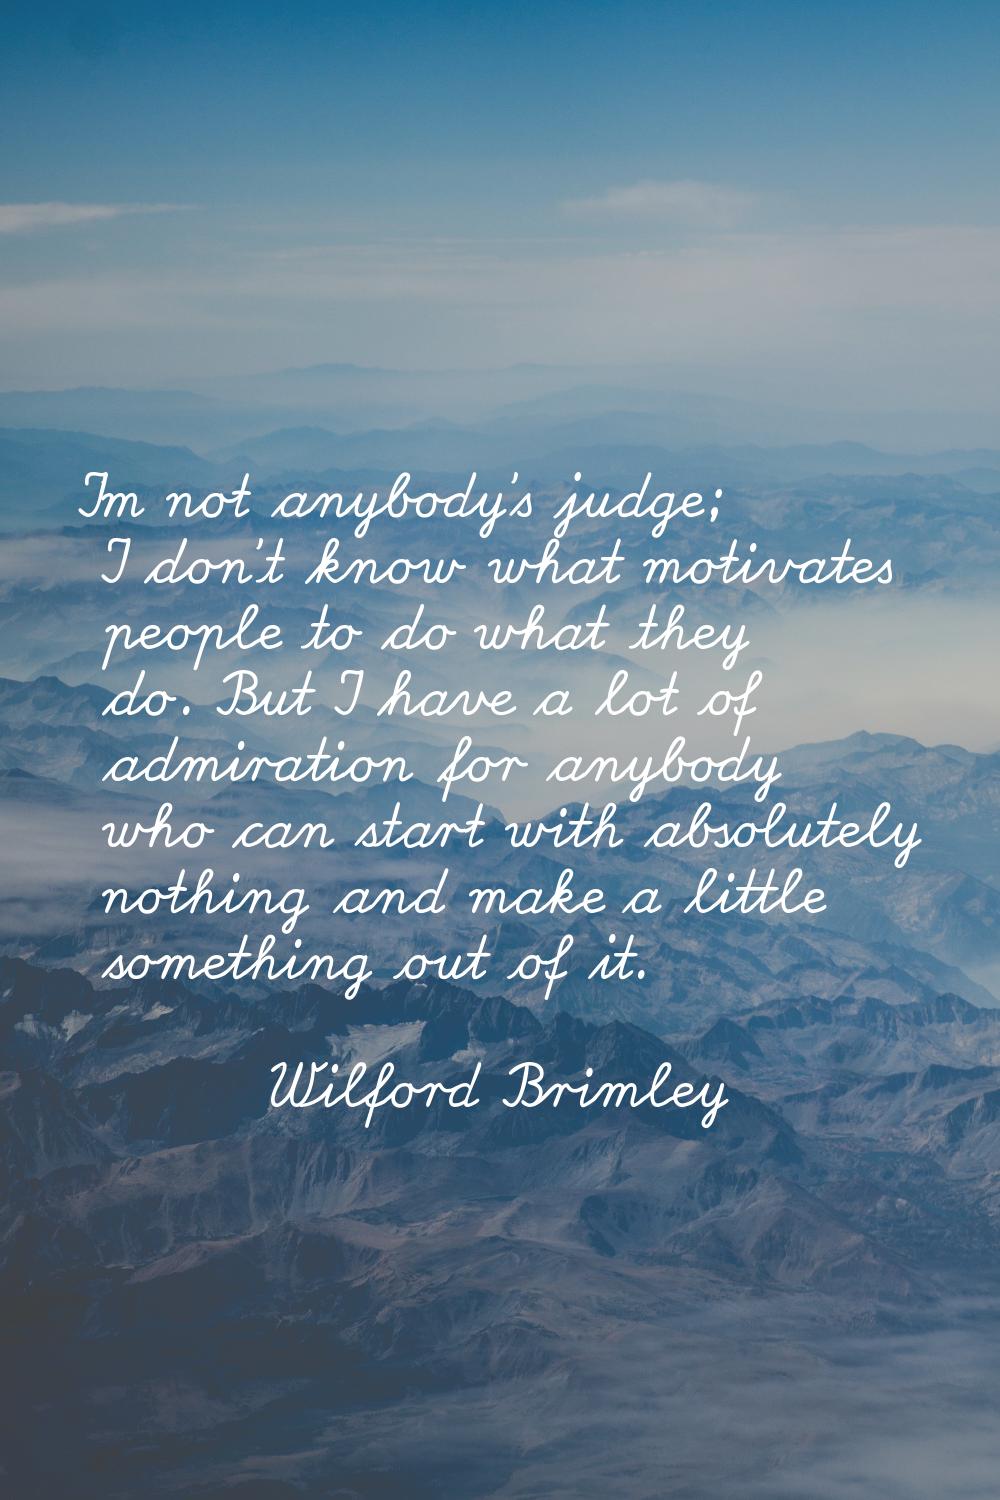 I'm not anybody's judge; I don't know what motivates people to do what they do. But I have a lot of